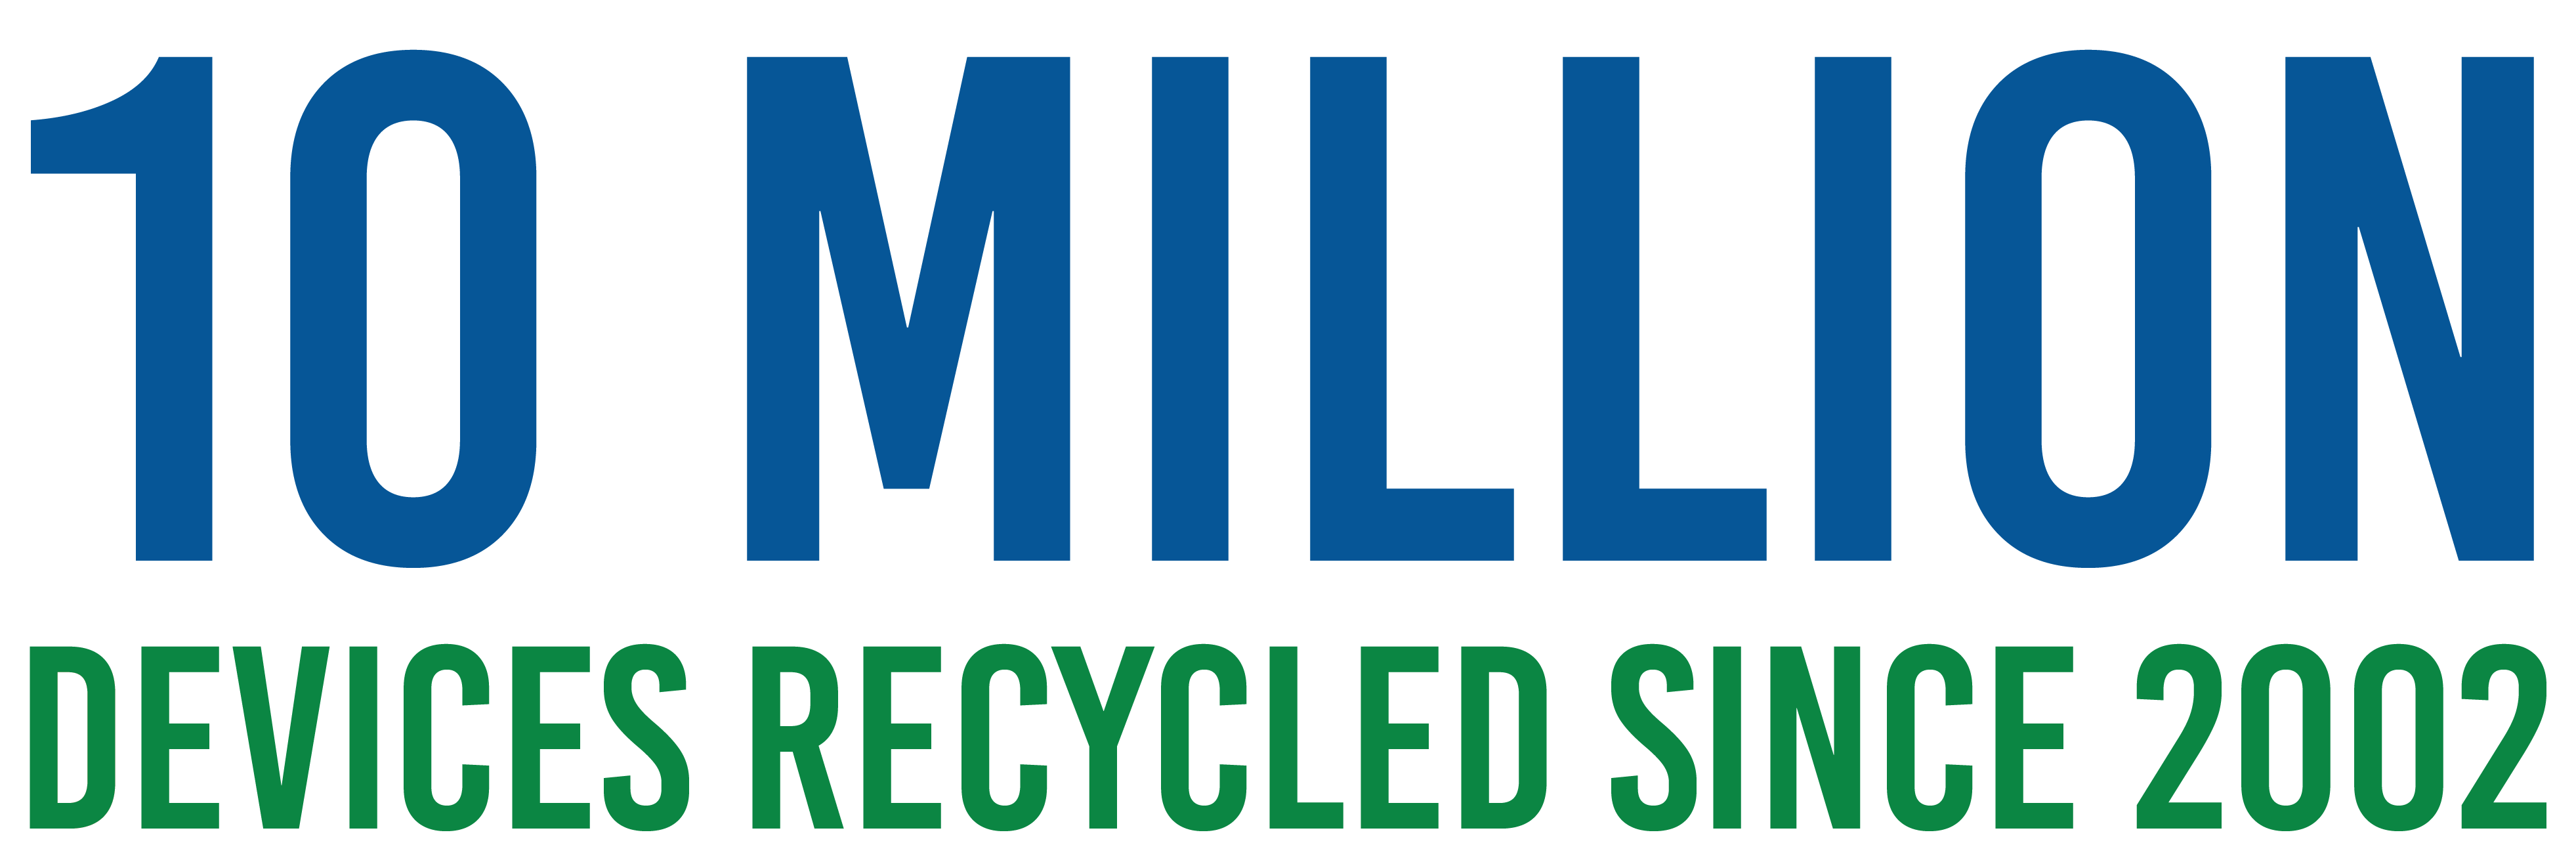 SmartphoneRecycling.com has Safely Recycled Over 10 Million Devices Since 2002